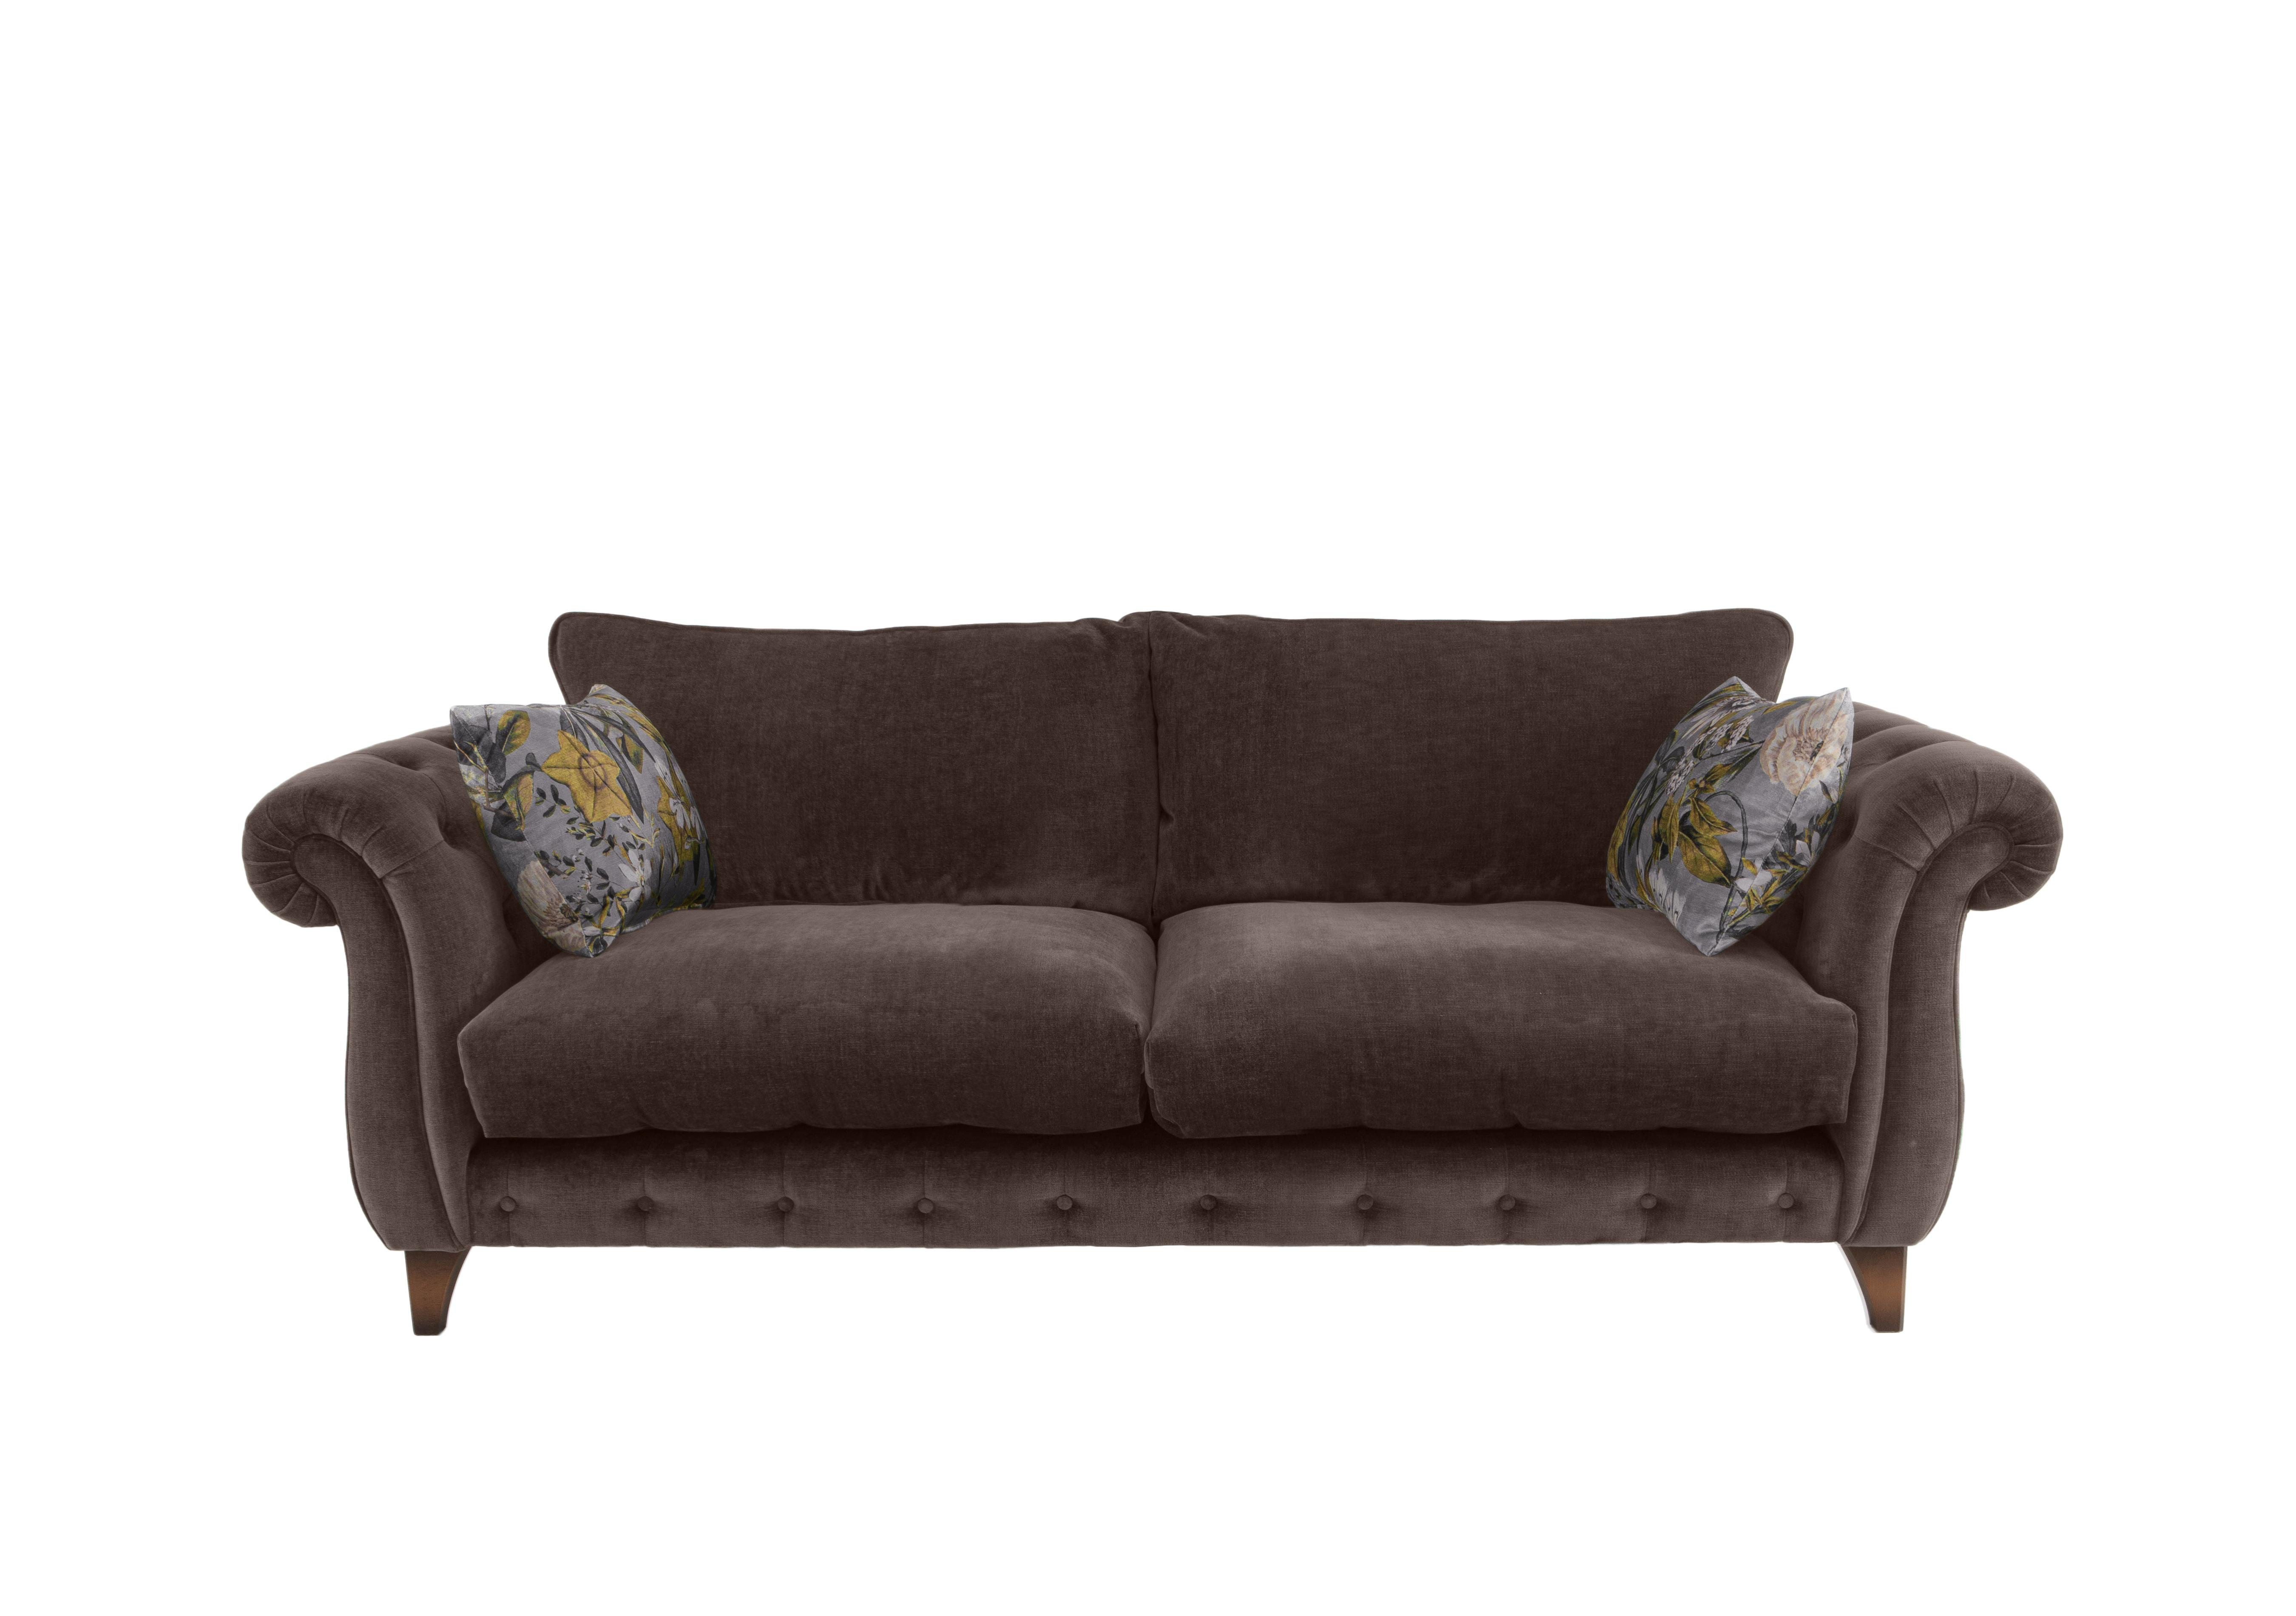 Boutique Palace Fabric 2 Seater Classic Back Sofa in Oasis Mocha on Furniture Village